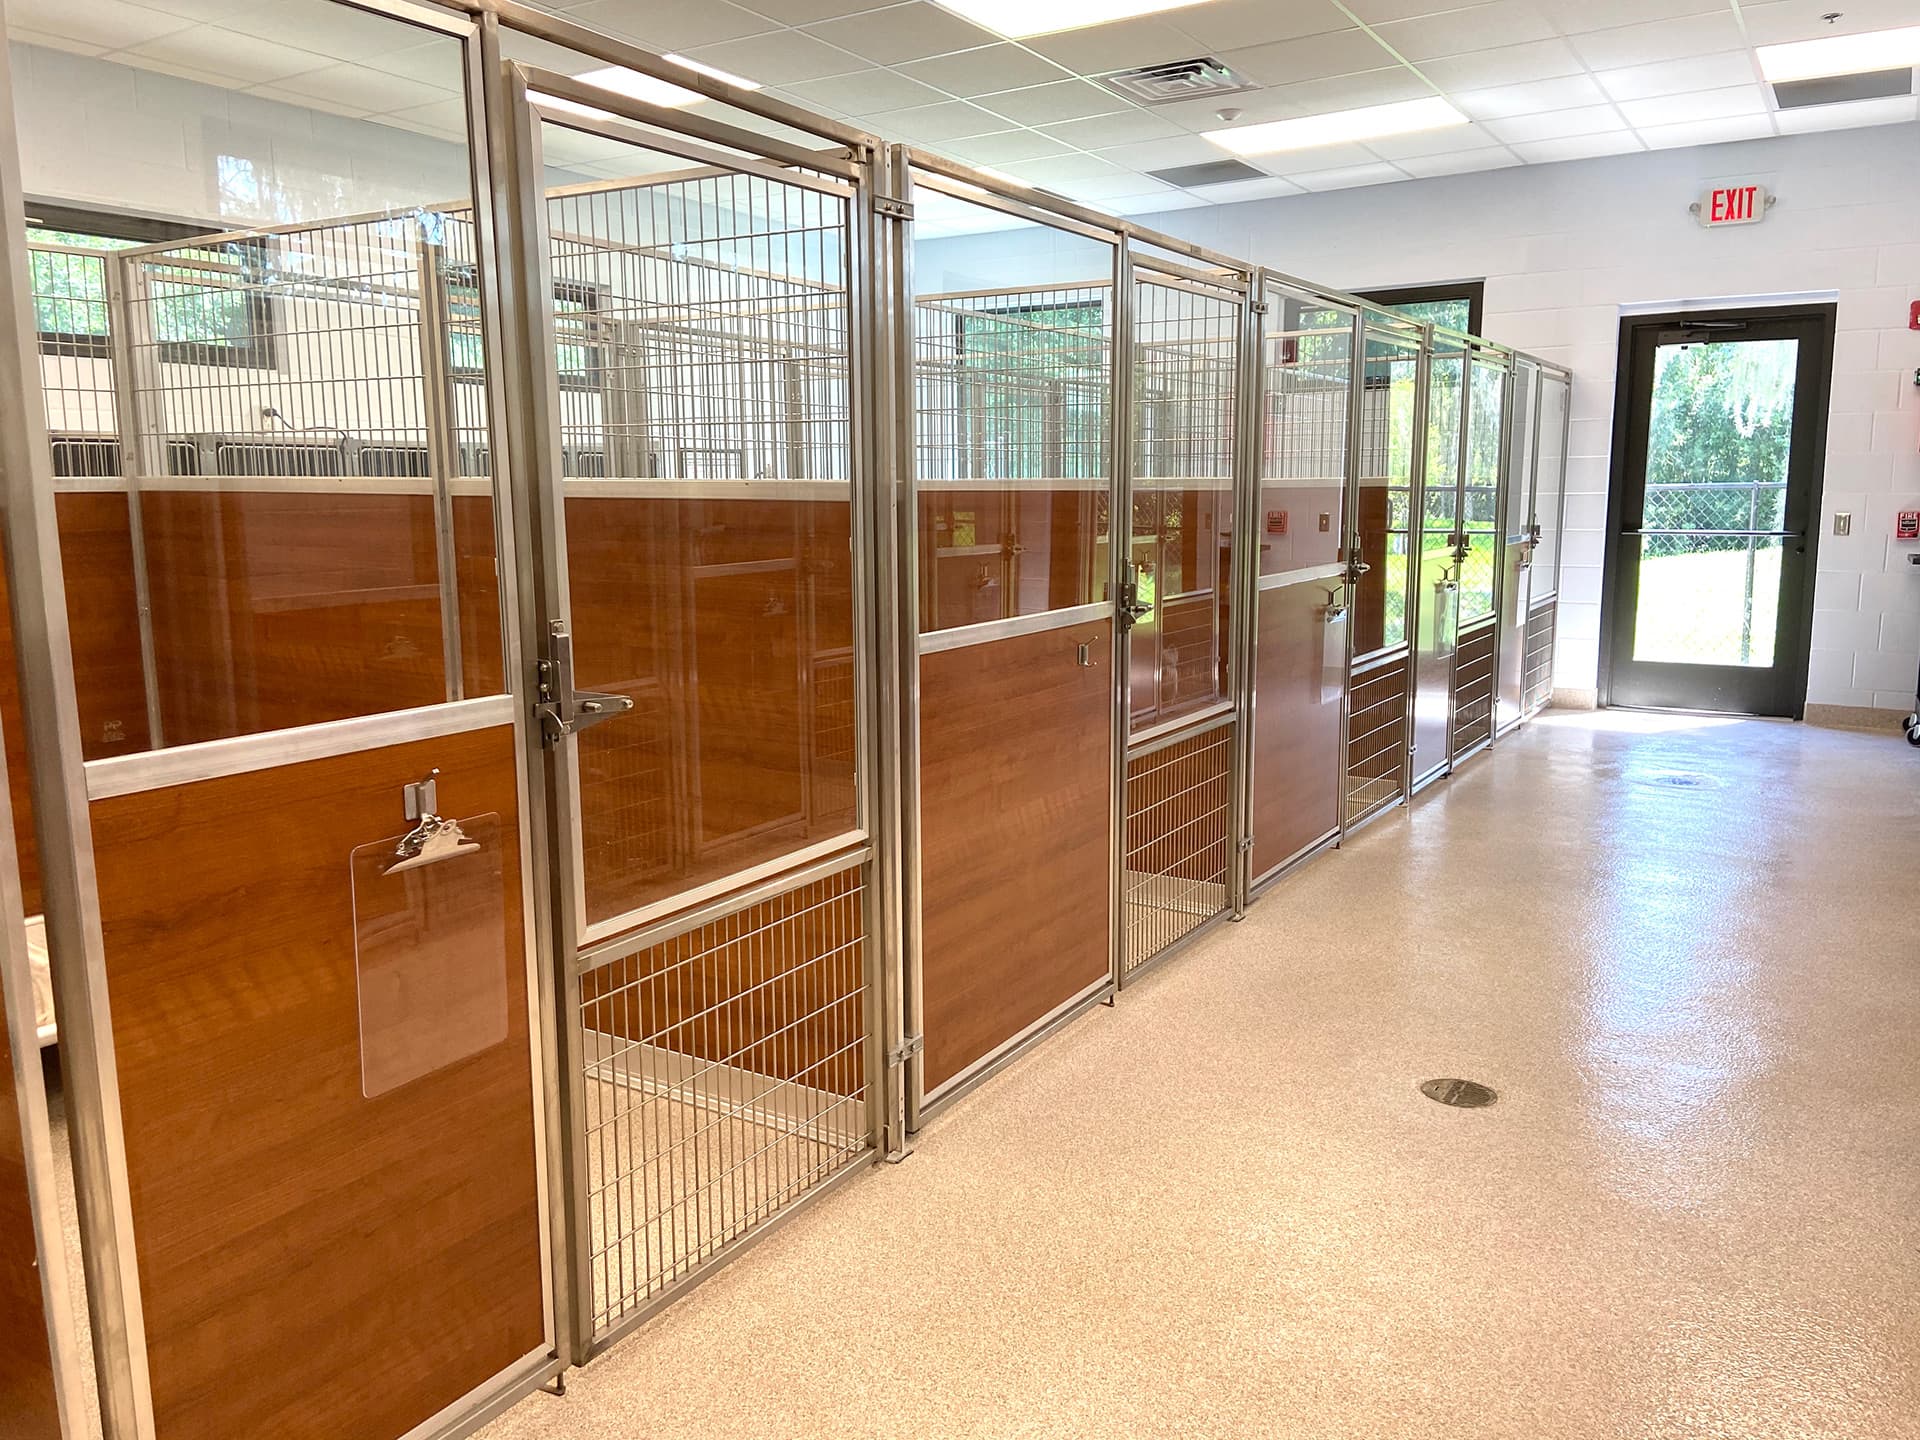 Construction management services for veterinary clinic in Orlando Florida